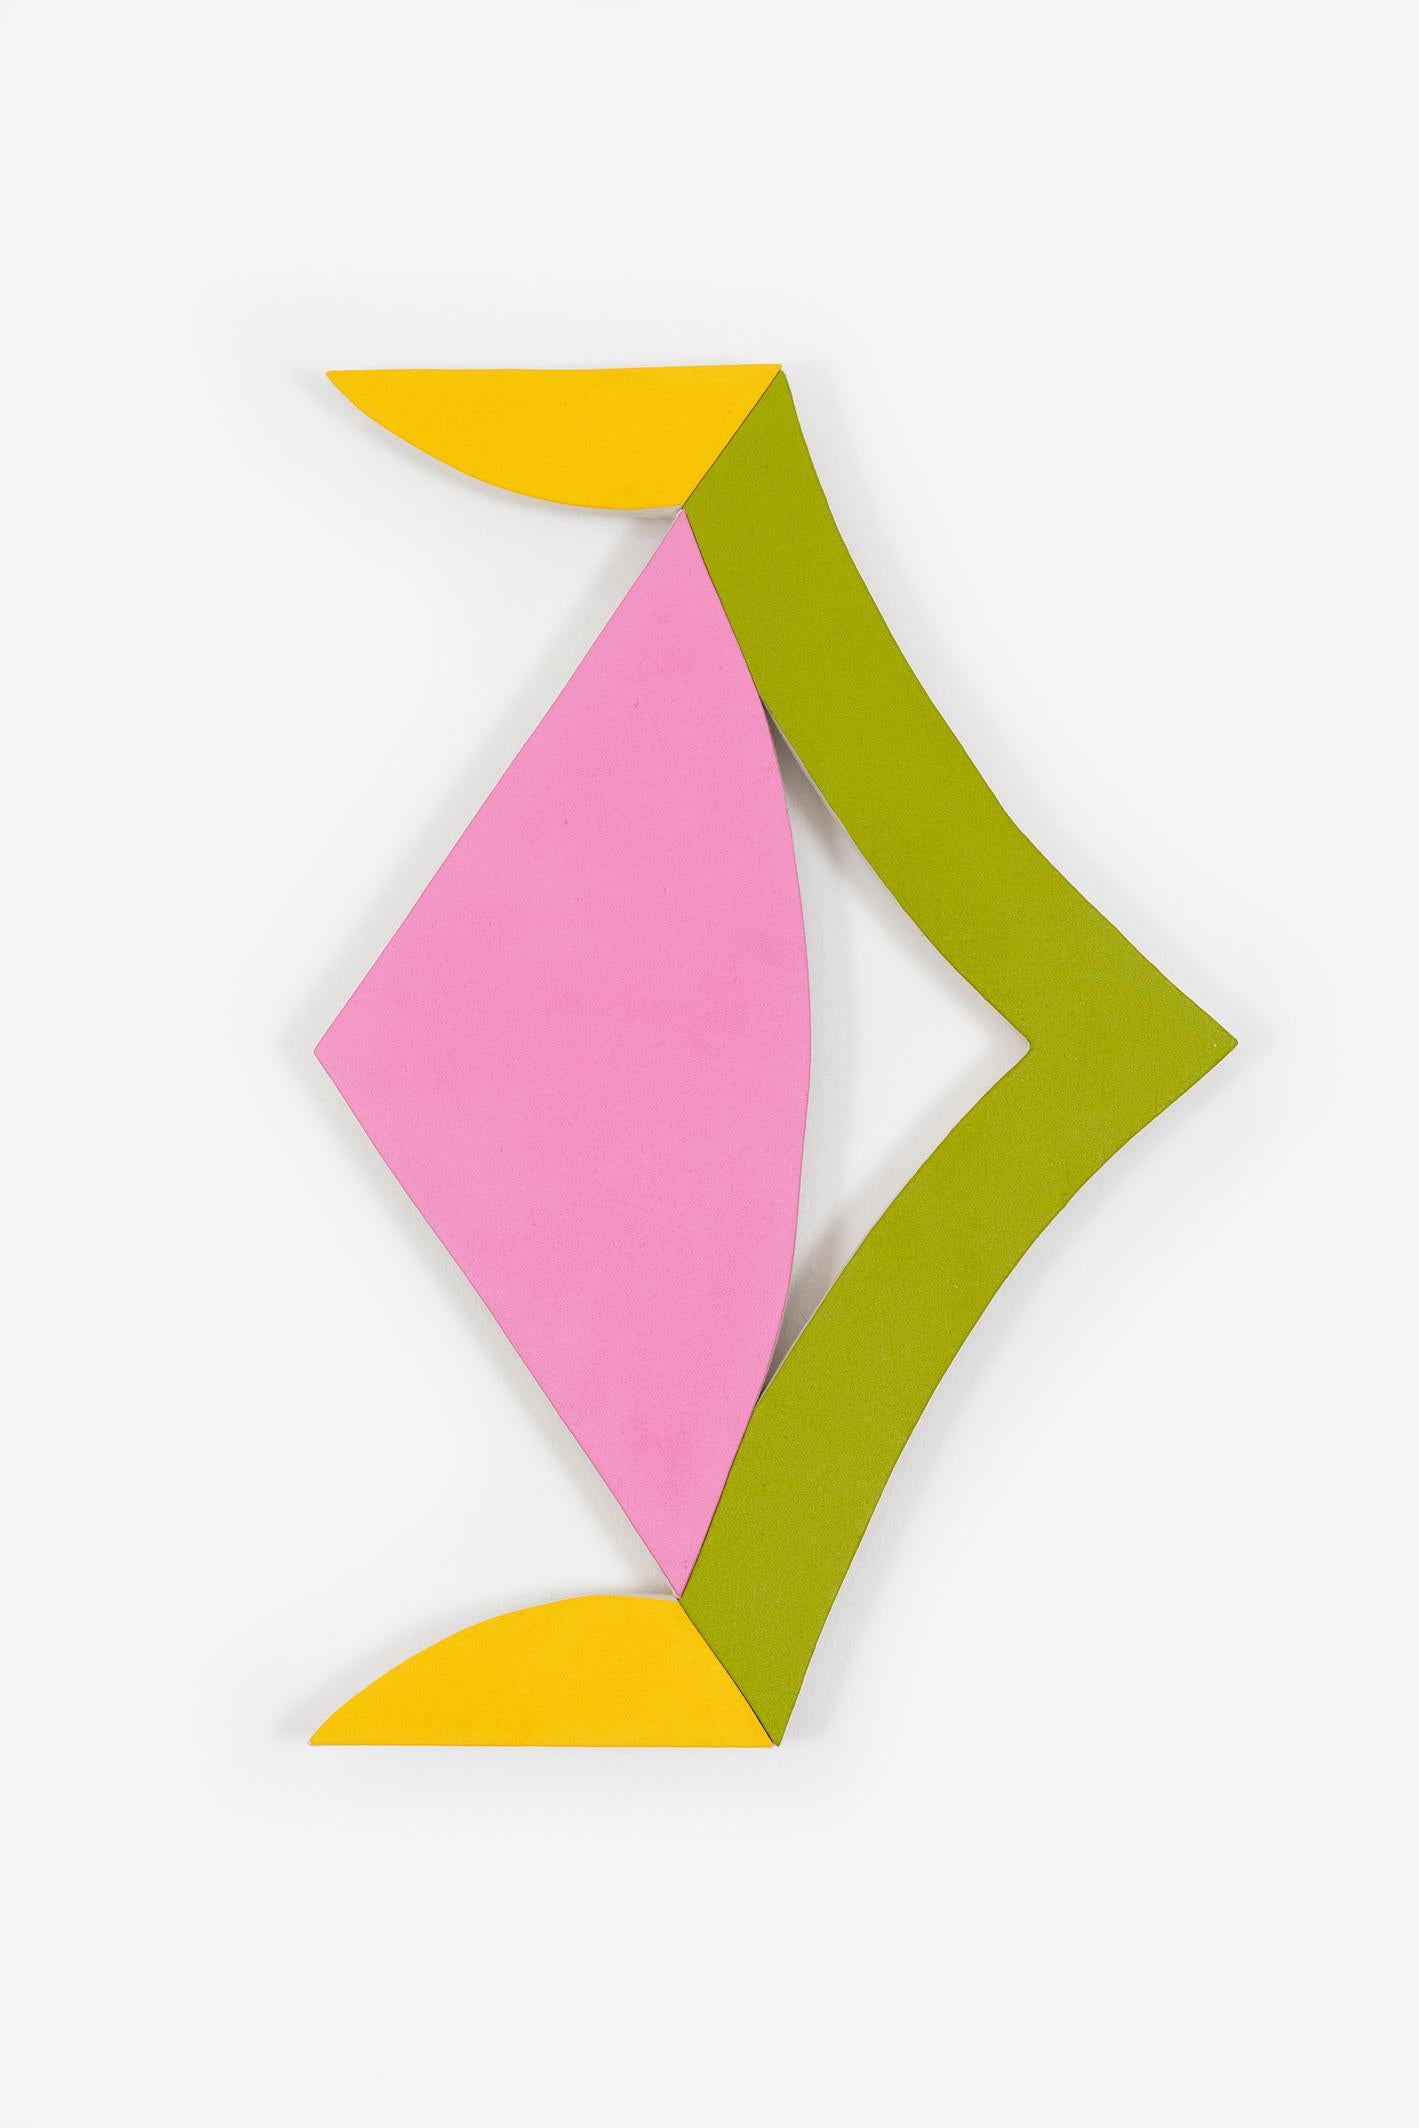 Jason Matherly Abstract Painting - "21-5" Wall Sculpture-yellow, pink, green, geometric, mid century, mcm, small